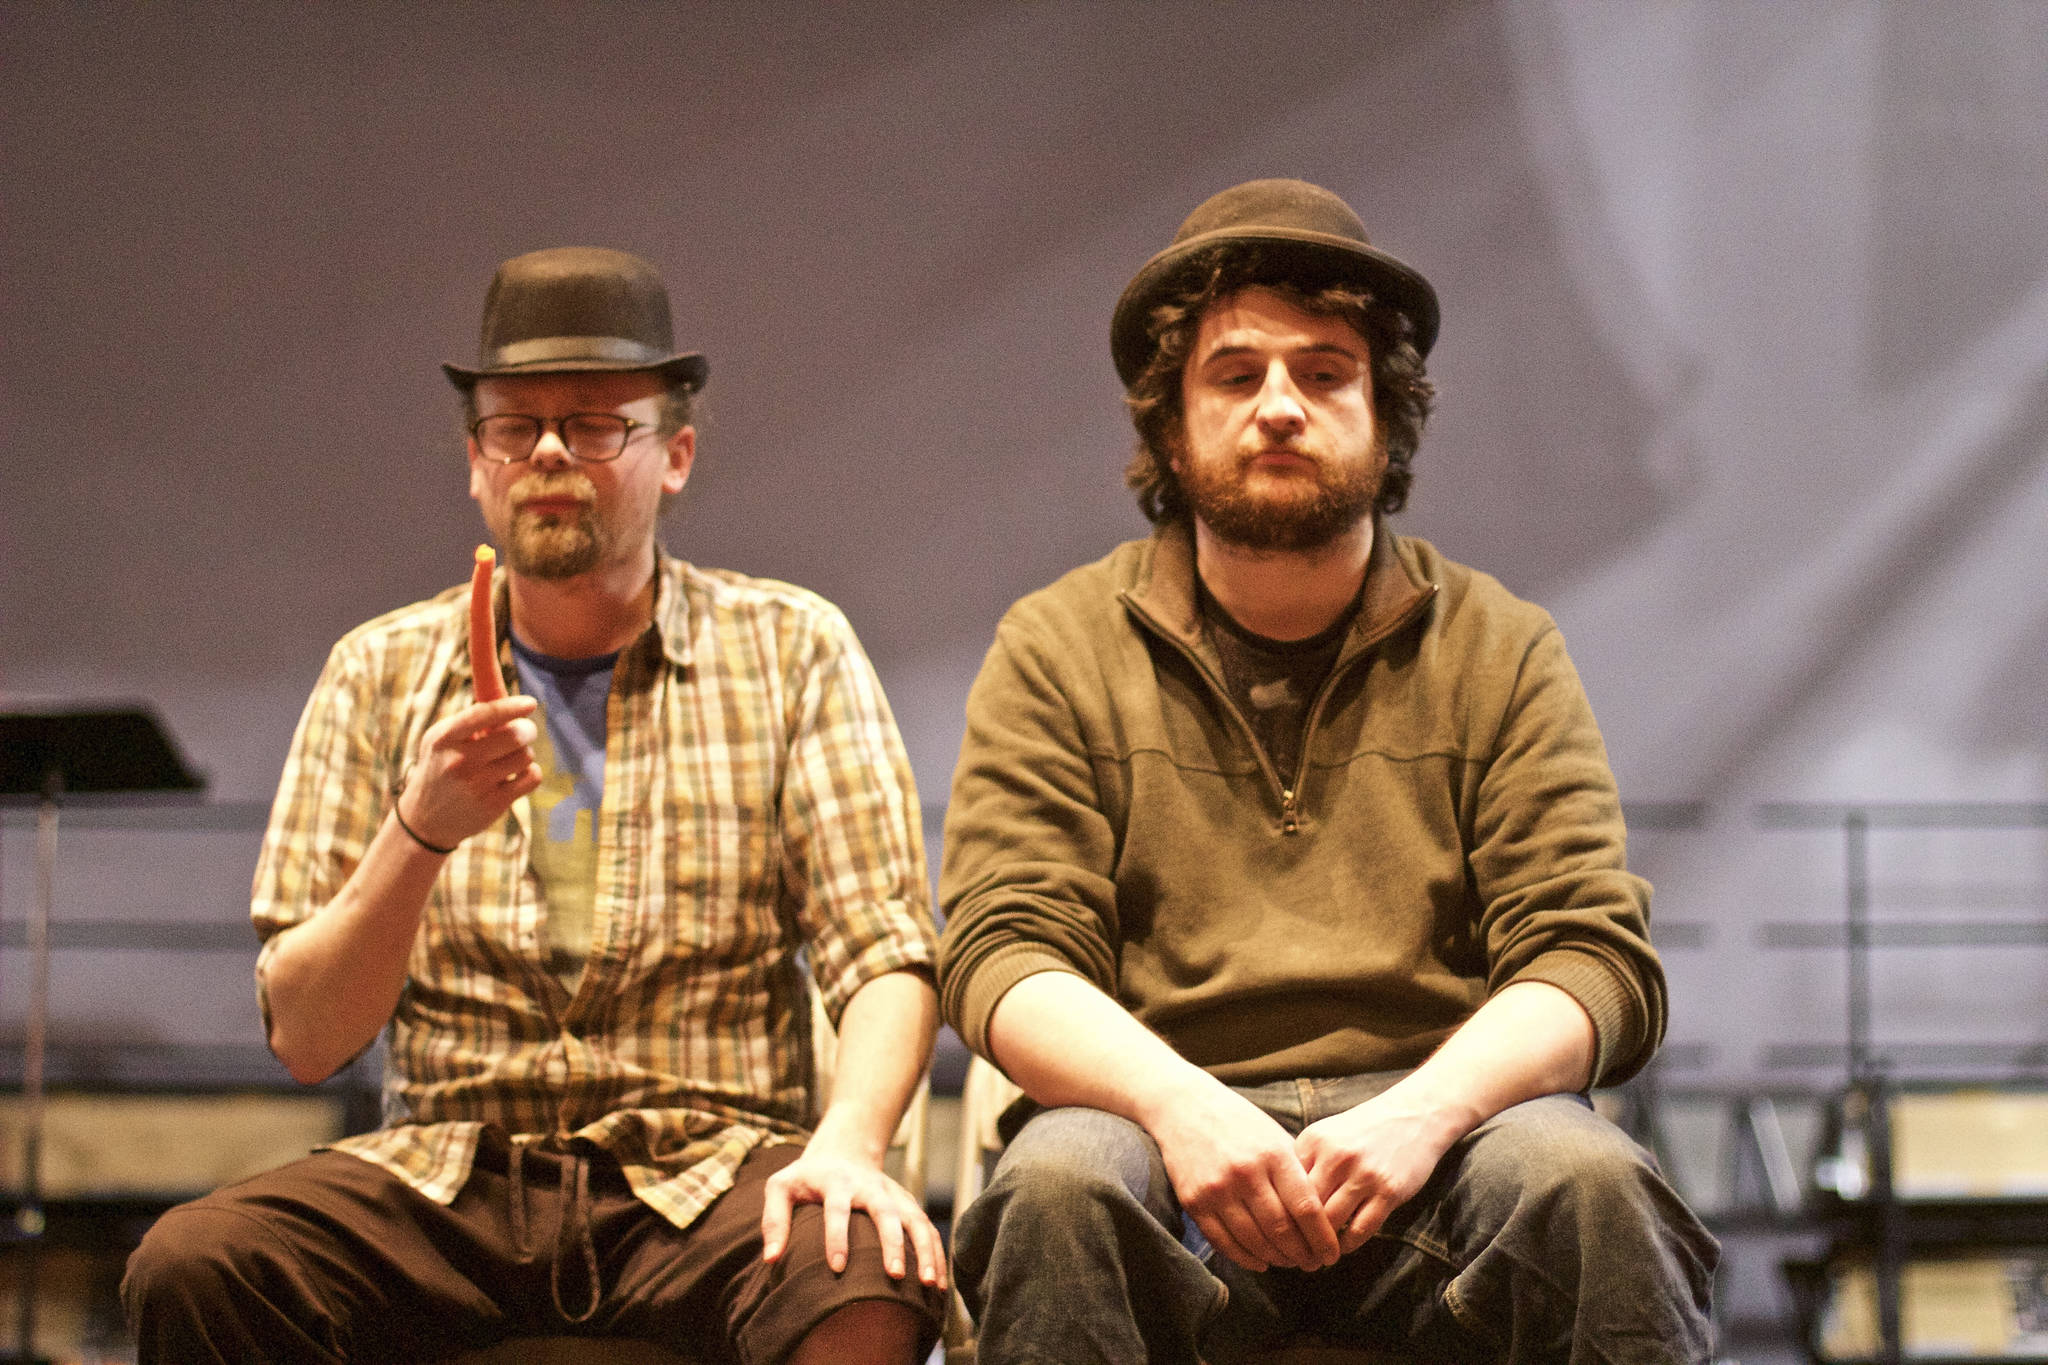 Matt Lees, left, and Peter Sheppard, right practice a scene from Samuel Beckett’s “Waiting for Godot.” Sheppard directs the play, opening at 7 p.m. Friday, May 25, for the start of Pier One Theatre’s 2018 season. (Photo by Richard Rose)